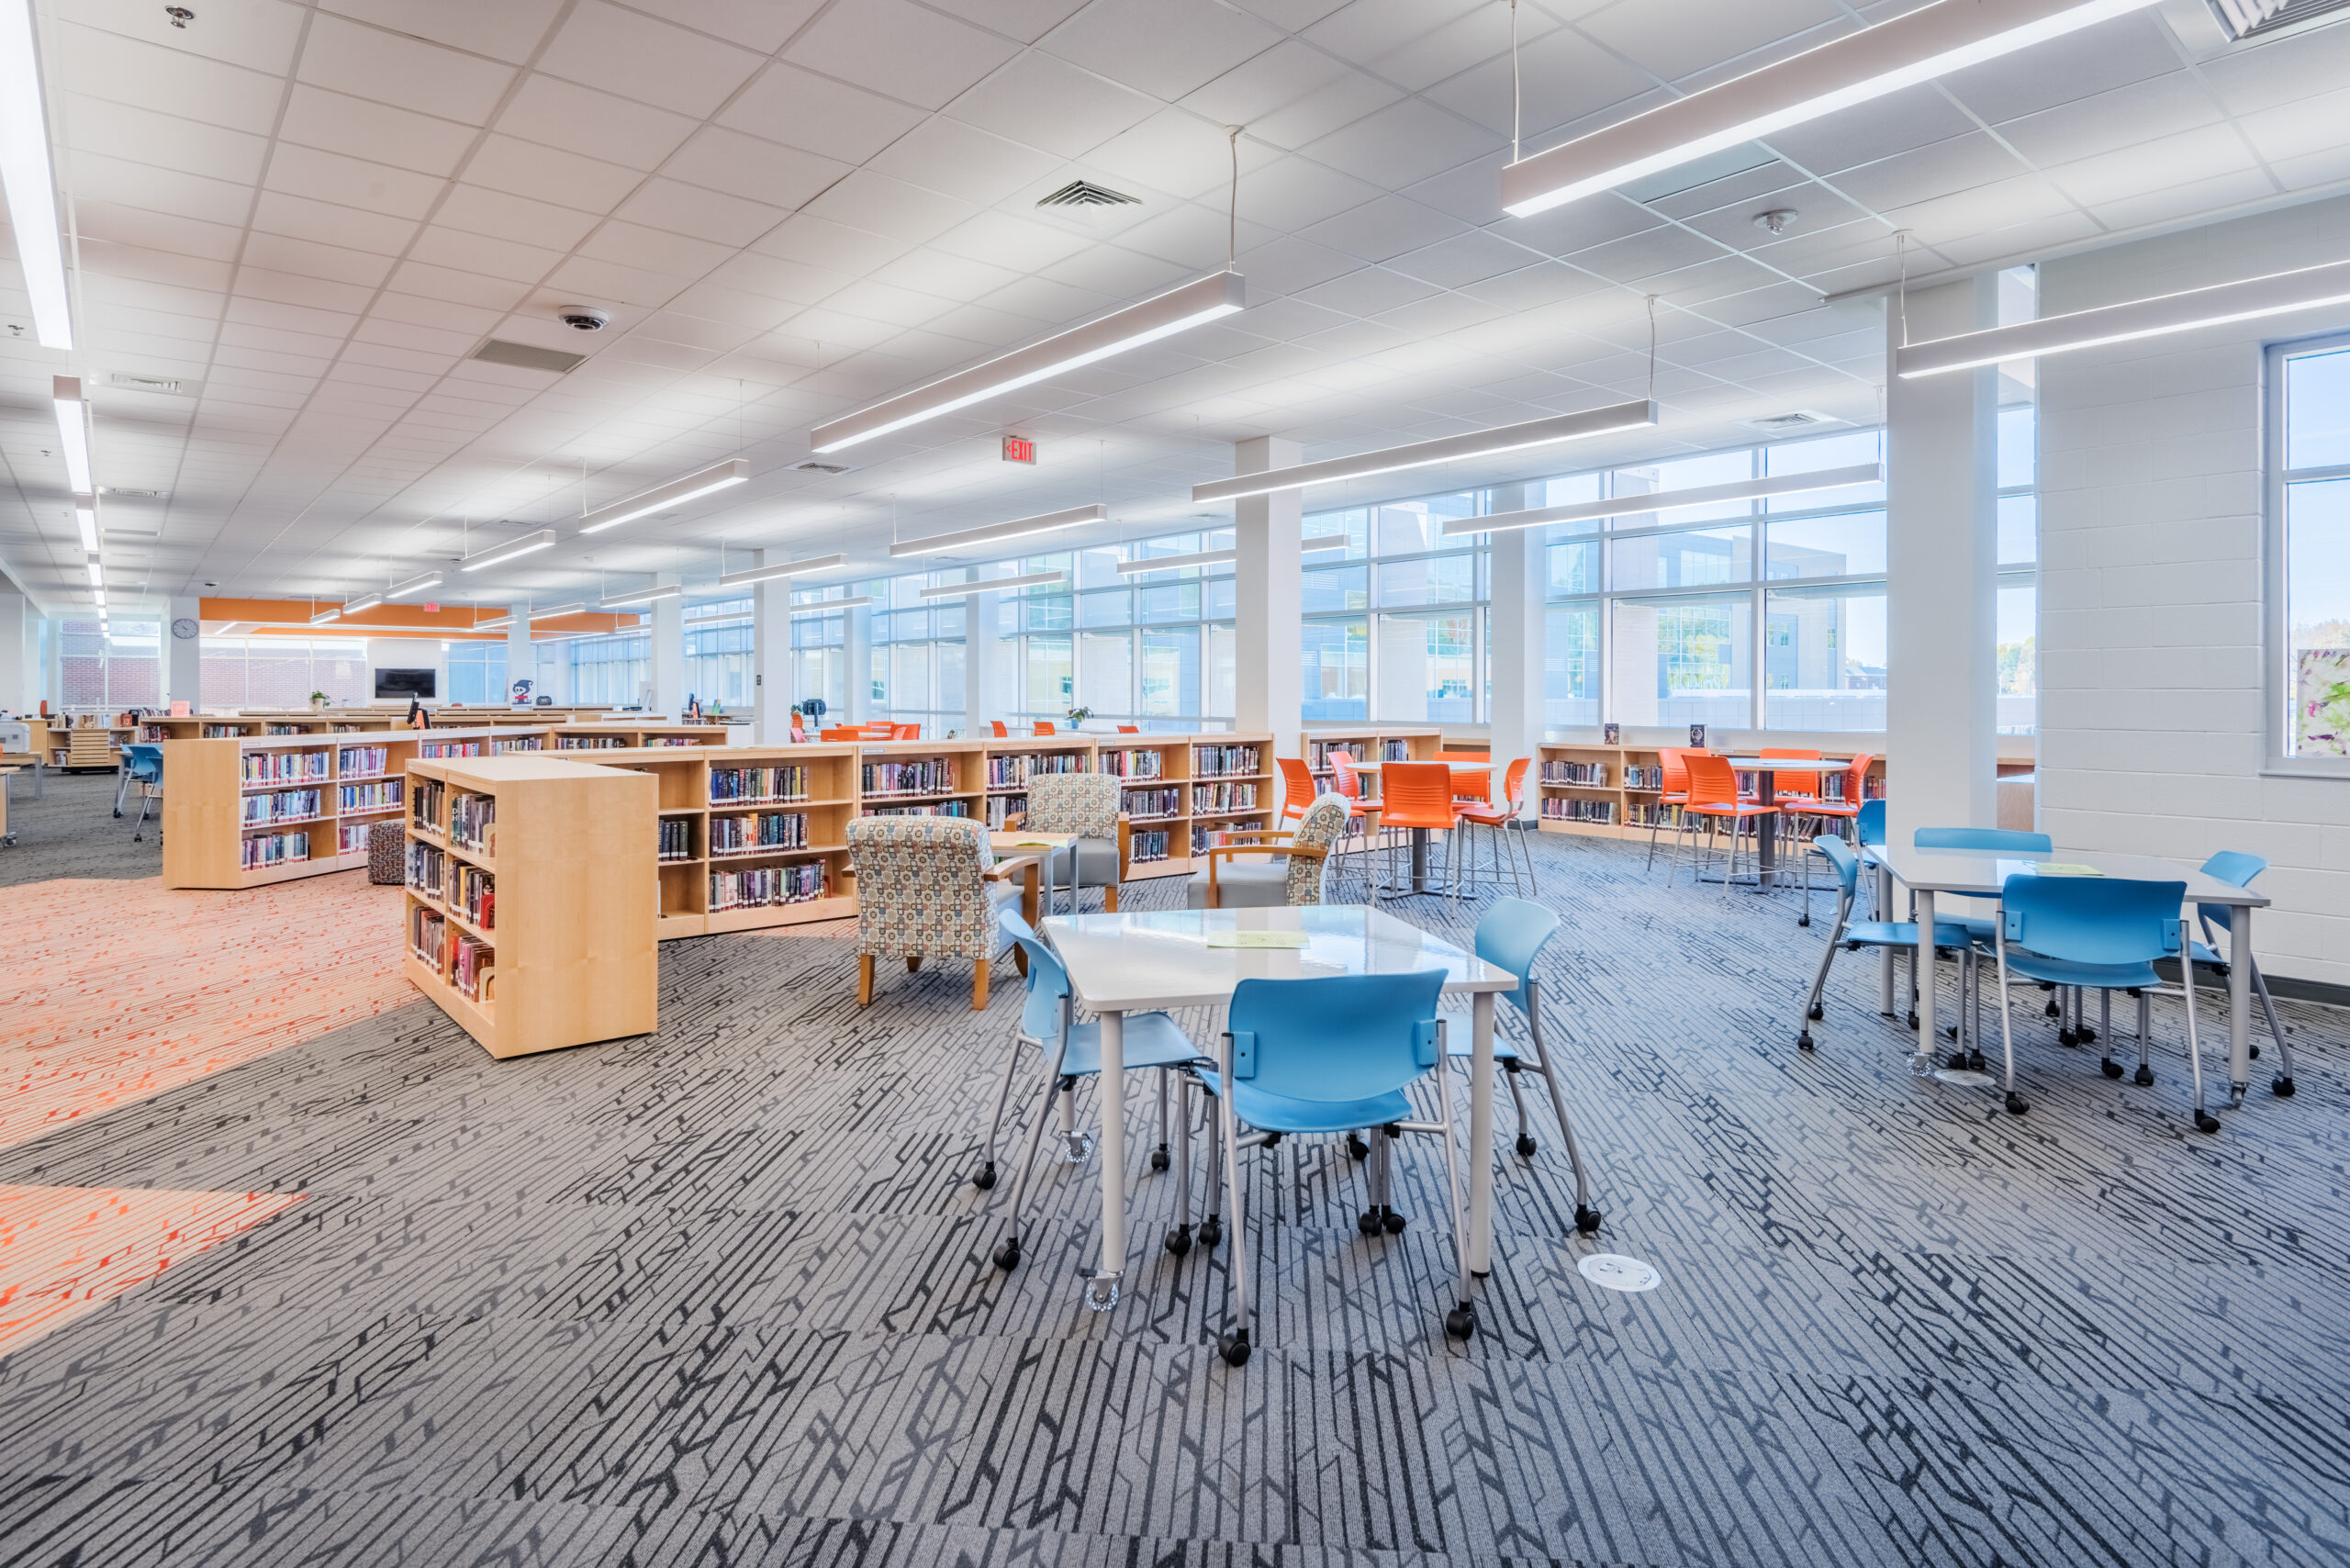 Fuquay-Varina High School Library Open Seating Areas Surrounded by Full, Half-Height Book Shelves